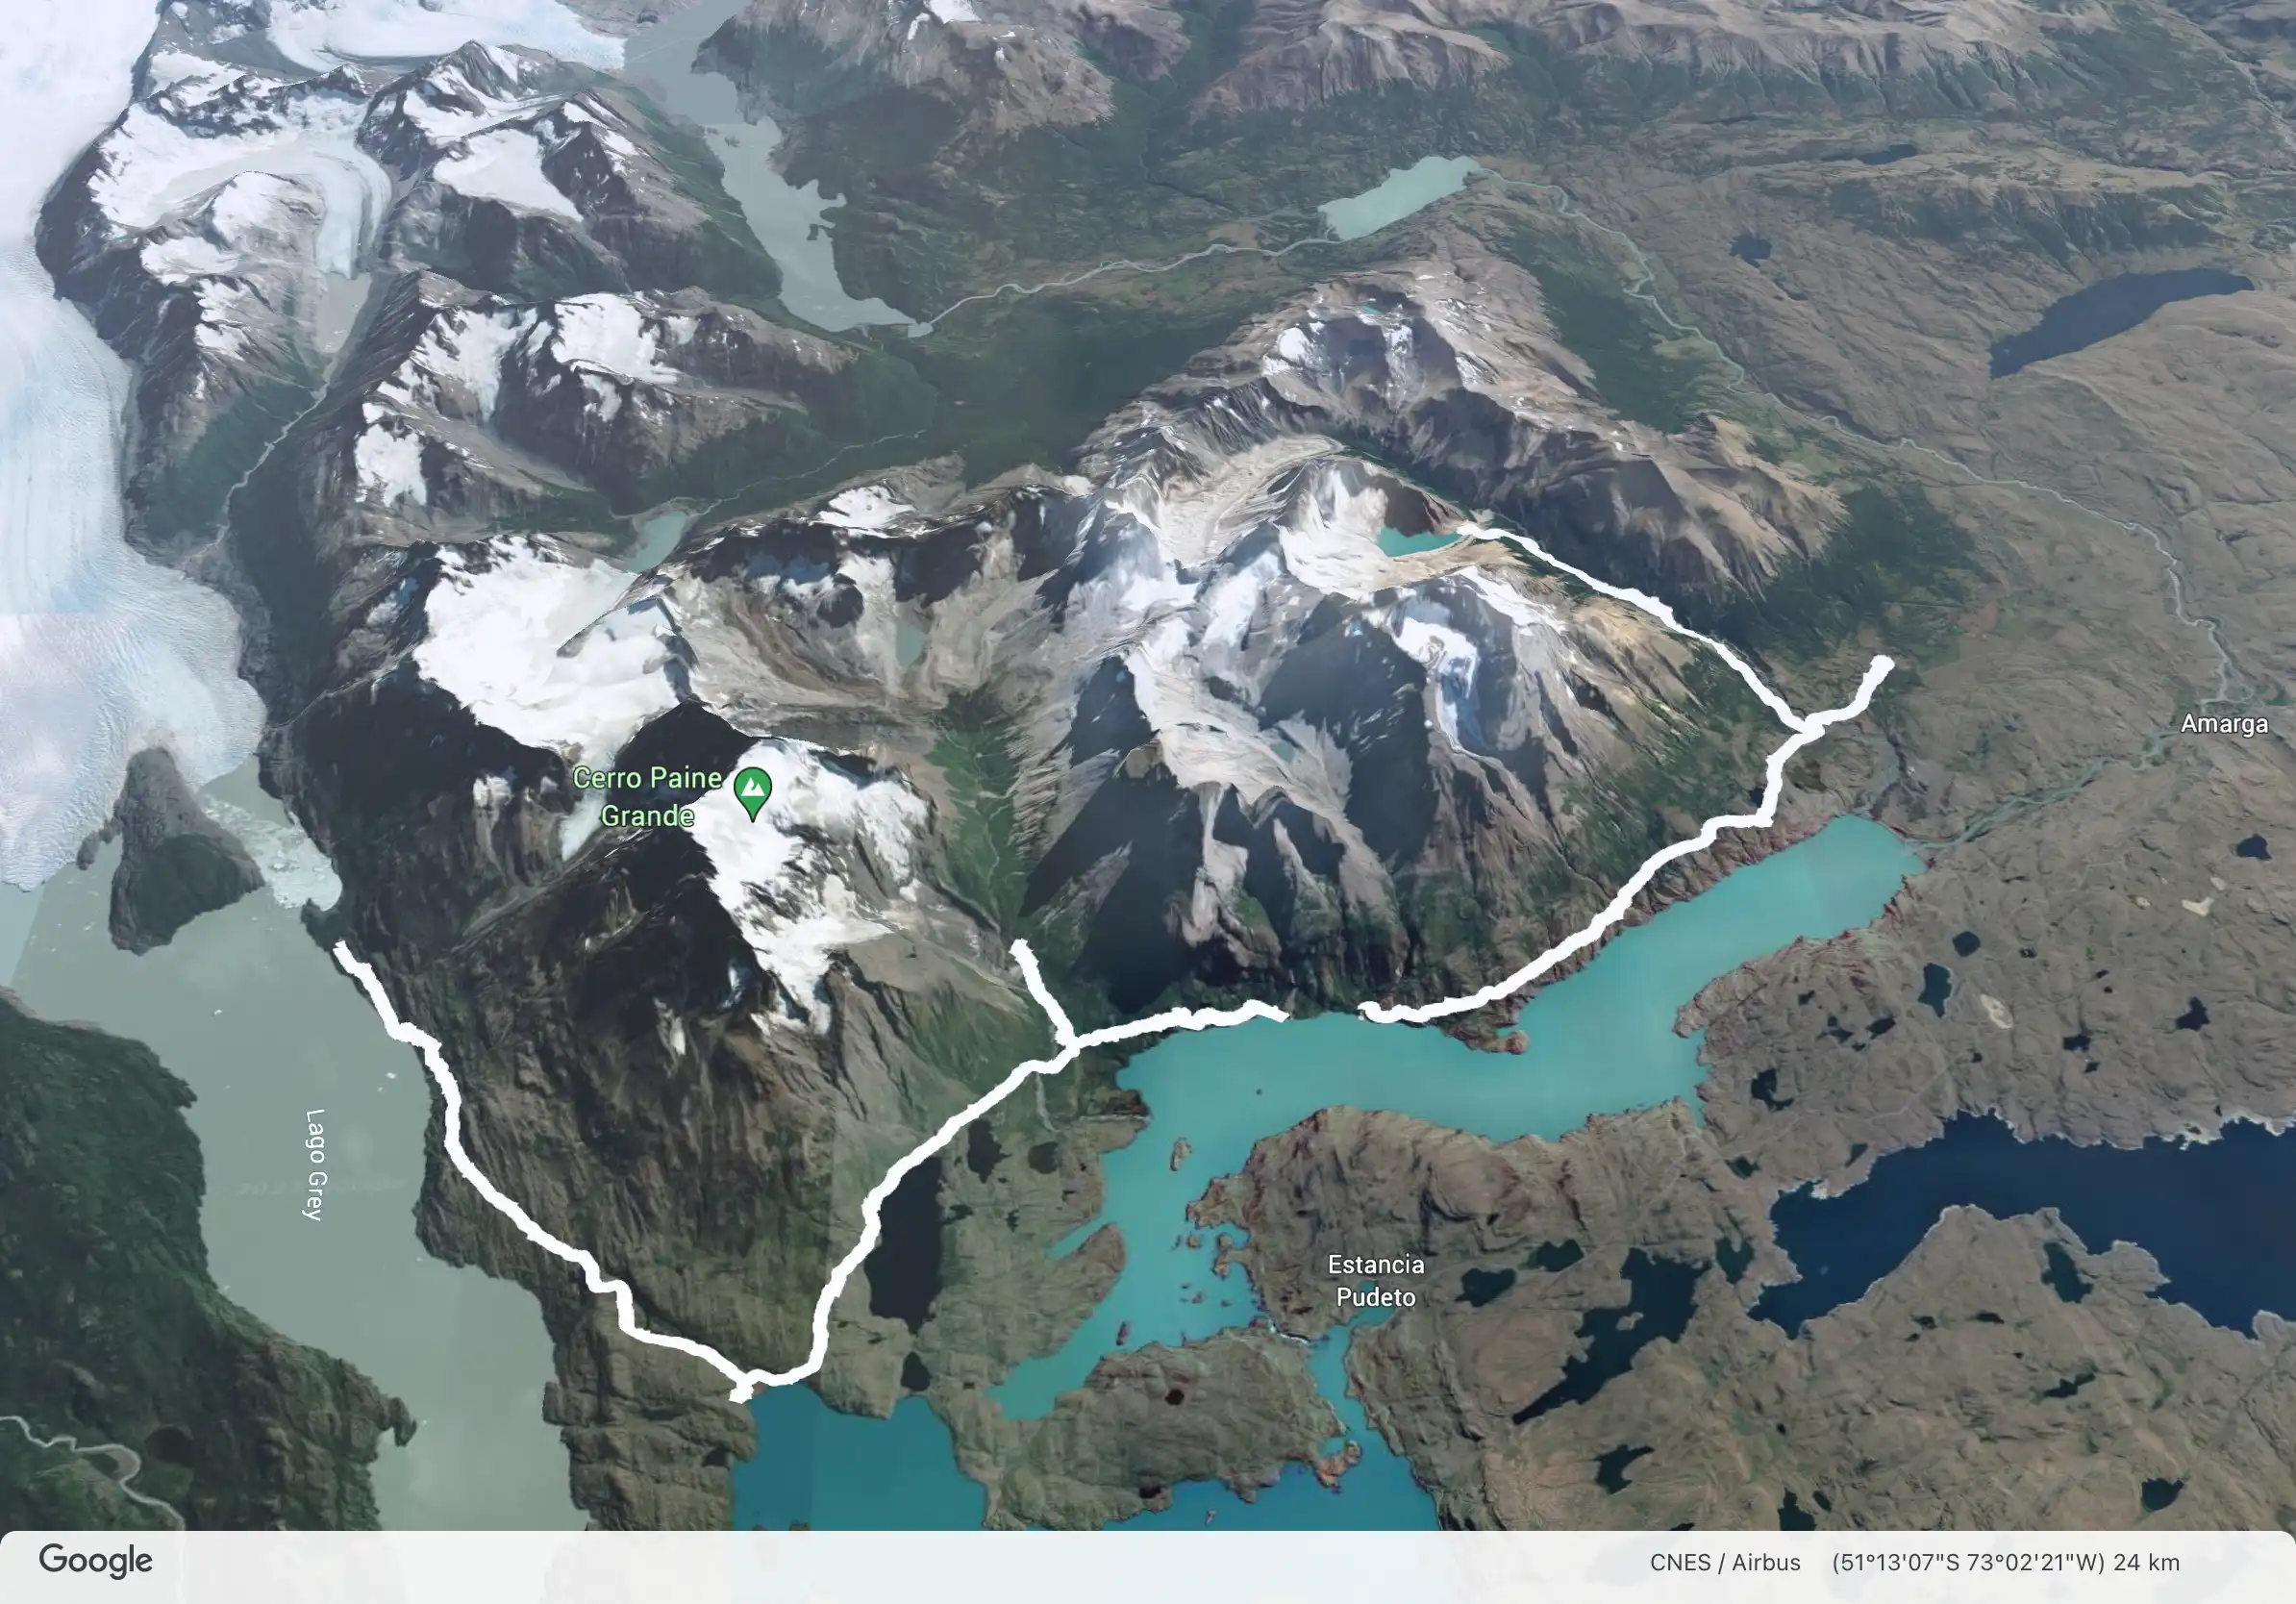 A 3D render of our path through Torres del Paine from Google Earth.